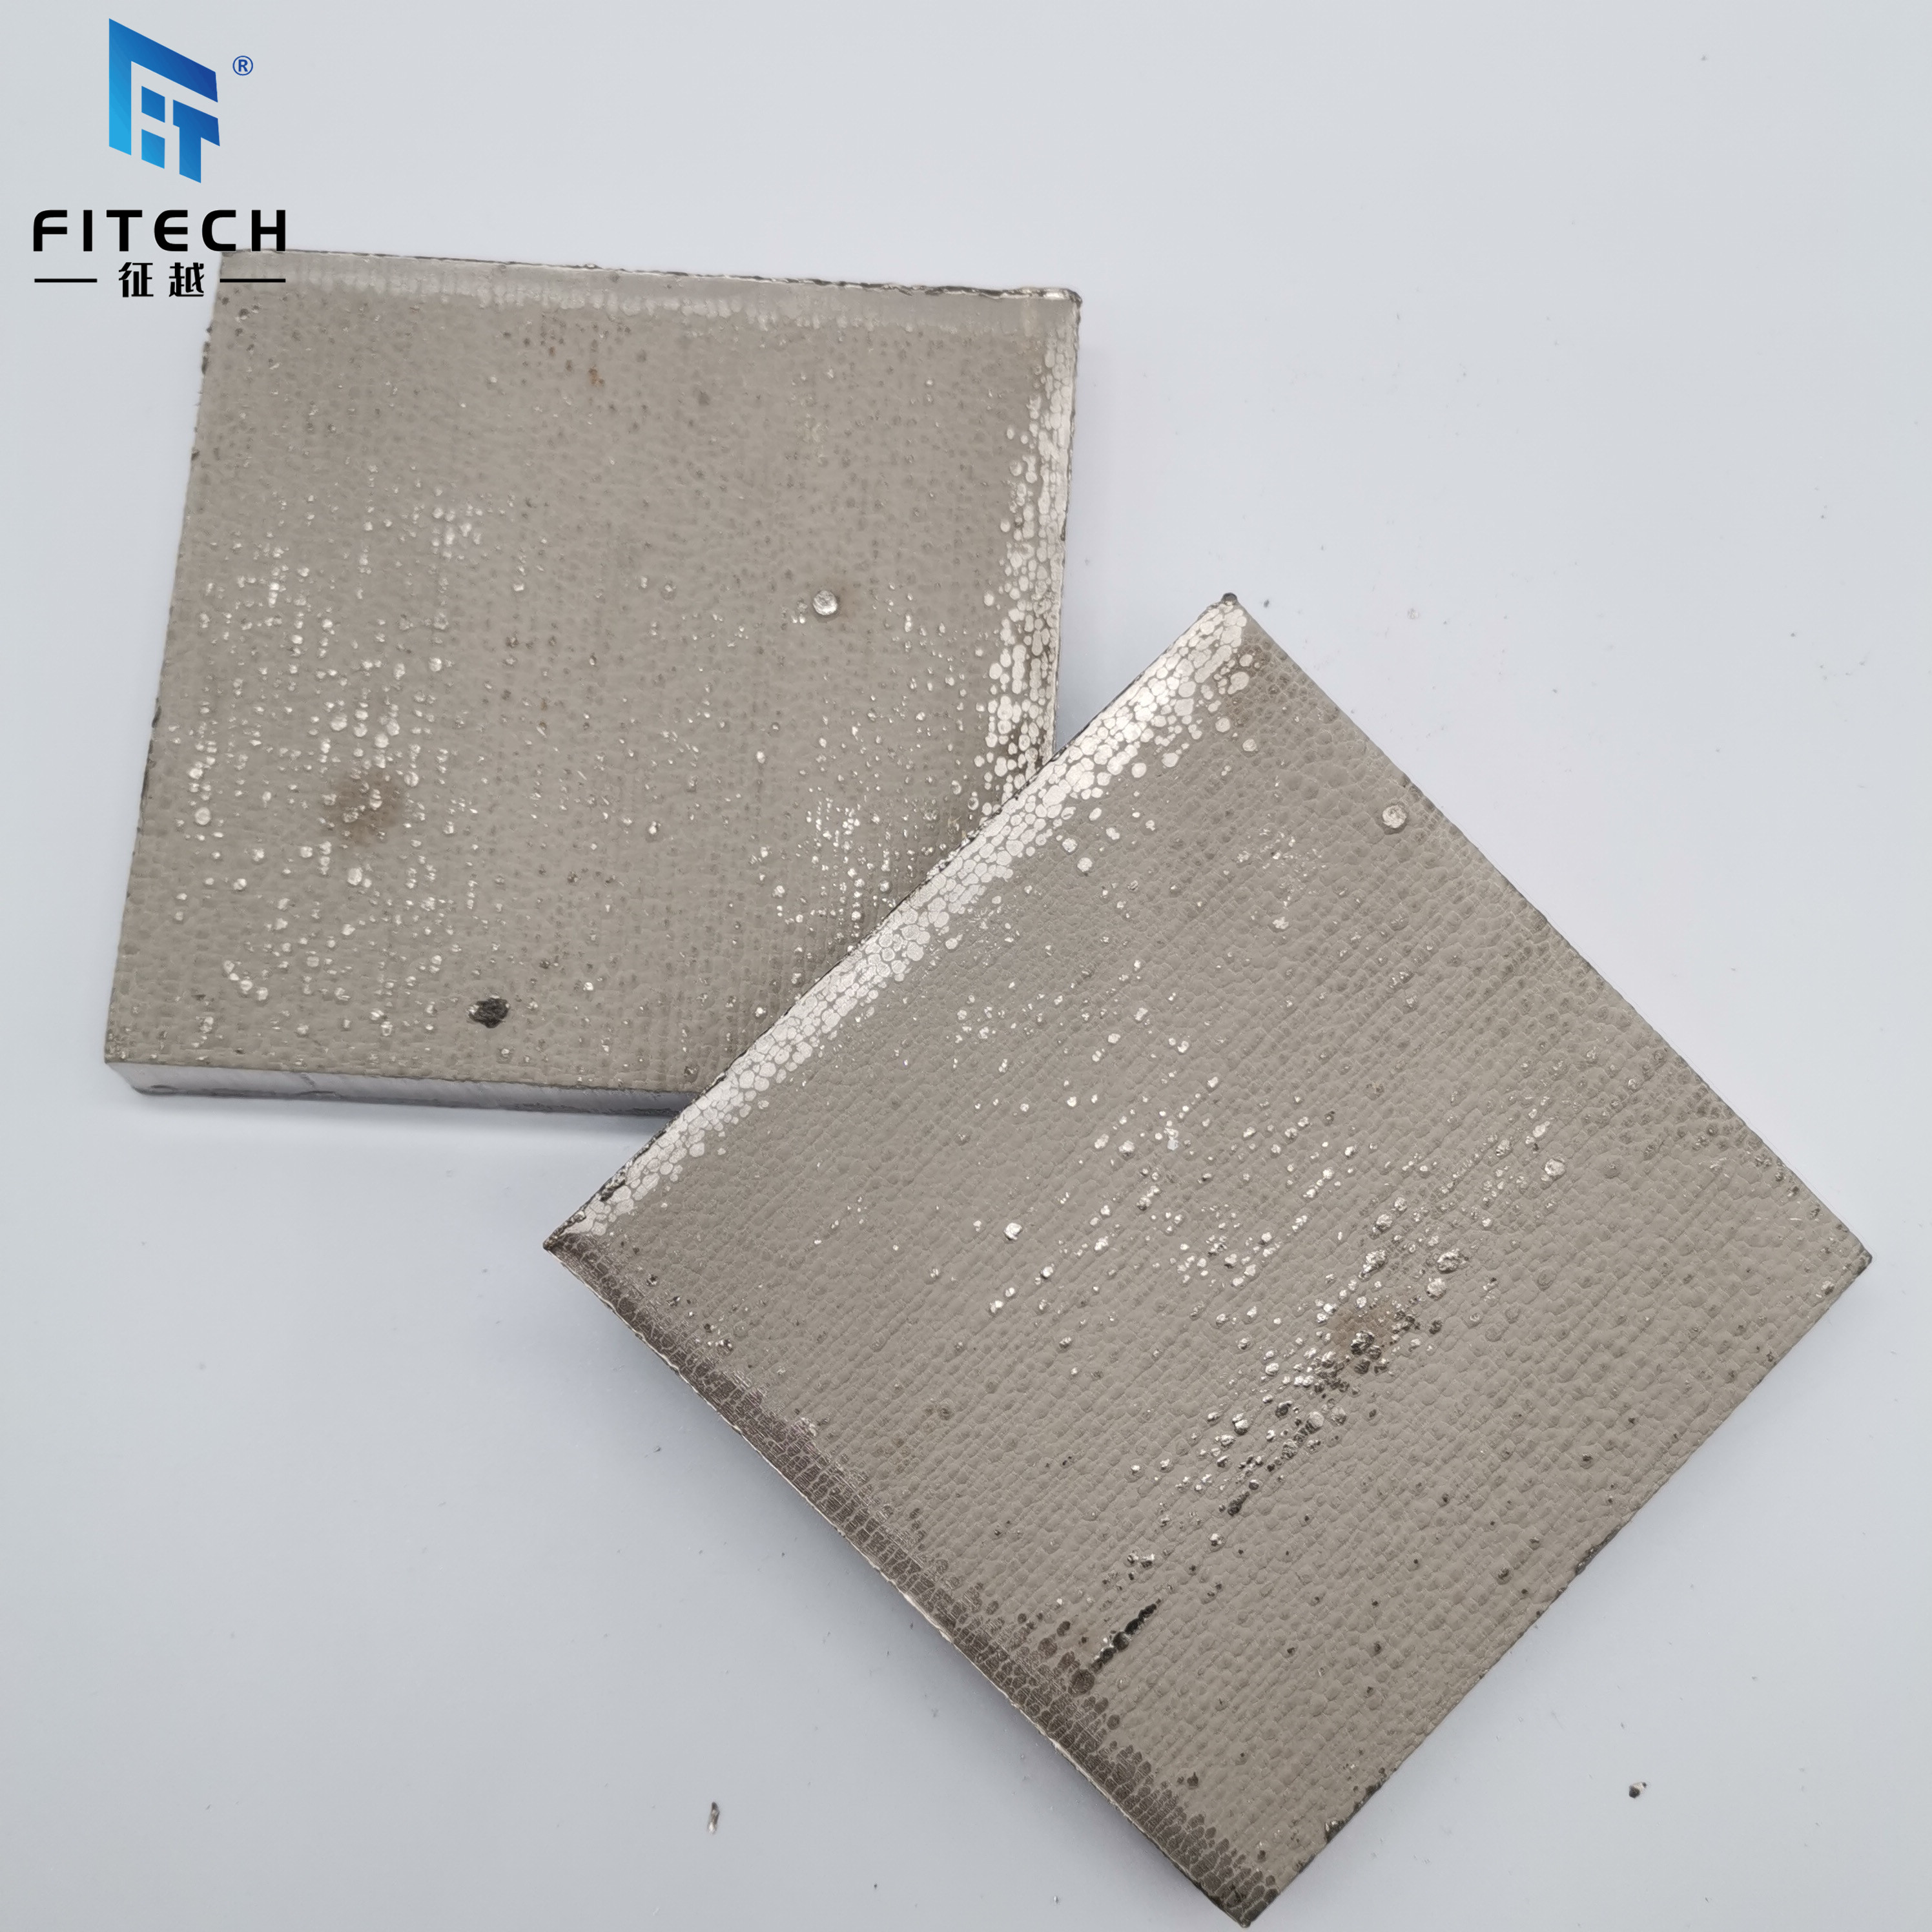 Ni High Resistance Flakes Provided Samples